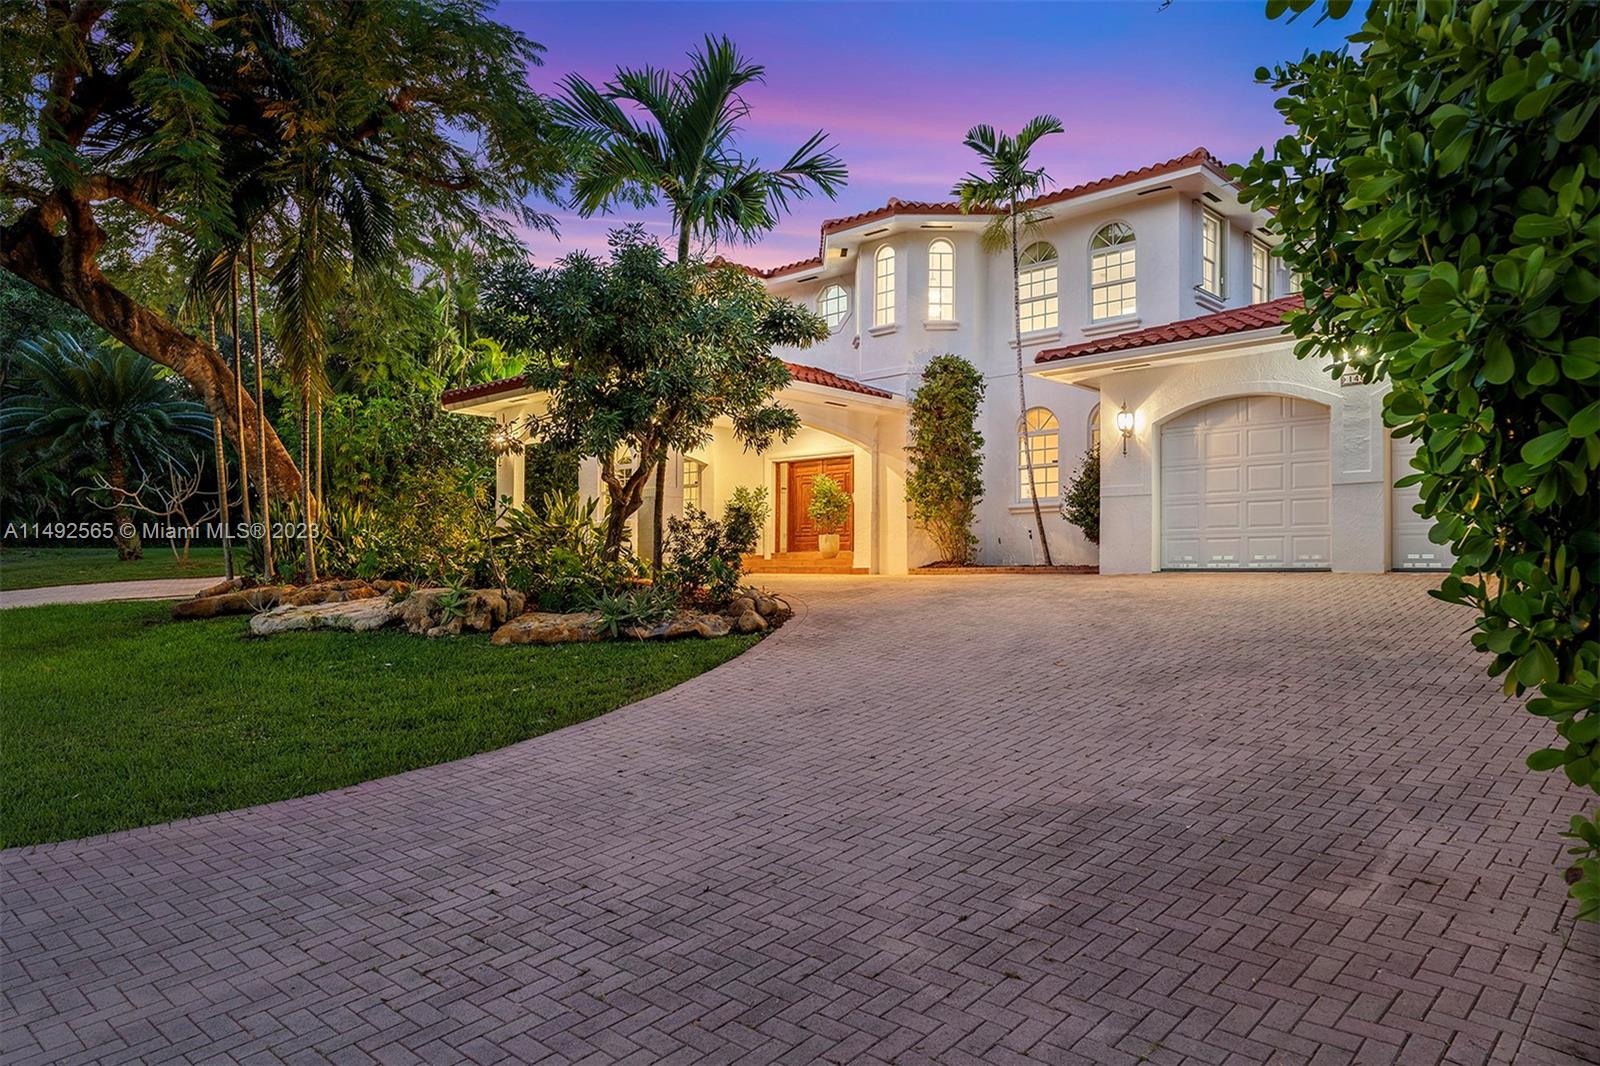 Experience timeless elegance in Coral Gables on prestigious Sunrise Avenue. This 4,000 sq.ft home boasts 5 beds & 4.5 baths. The foyer leads to formal living, dining, & family rooms, complemented by a gourmet kitchen with top-tier appliances & a cozy breakfast area. The layout includes a ground floor bedroom, full bath, & a convenient half bath. Upstairs, find two master suites, each with their own bath, plus two additional bedrooms & bath. Integrated sound system, impact windows, & advanced security features enhance the home's appeal. Outside, a refreshing pool, jacuzzi, & lush landscape await. Complete with a 2-car garage, circular driveway, & recent upgrades like a new roof & central AC in 2022, this home epitomizes Coral Gables living.